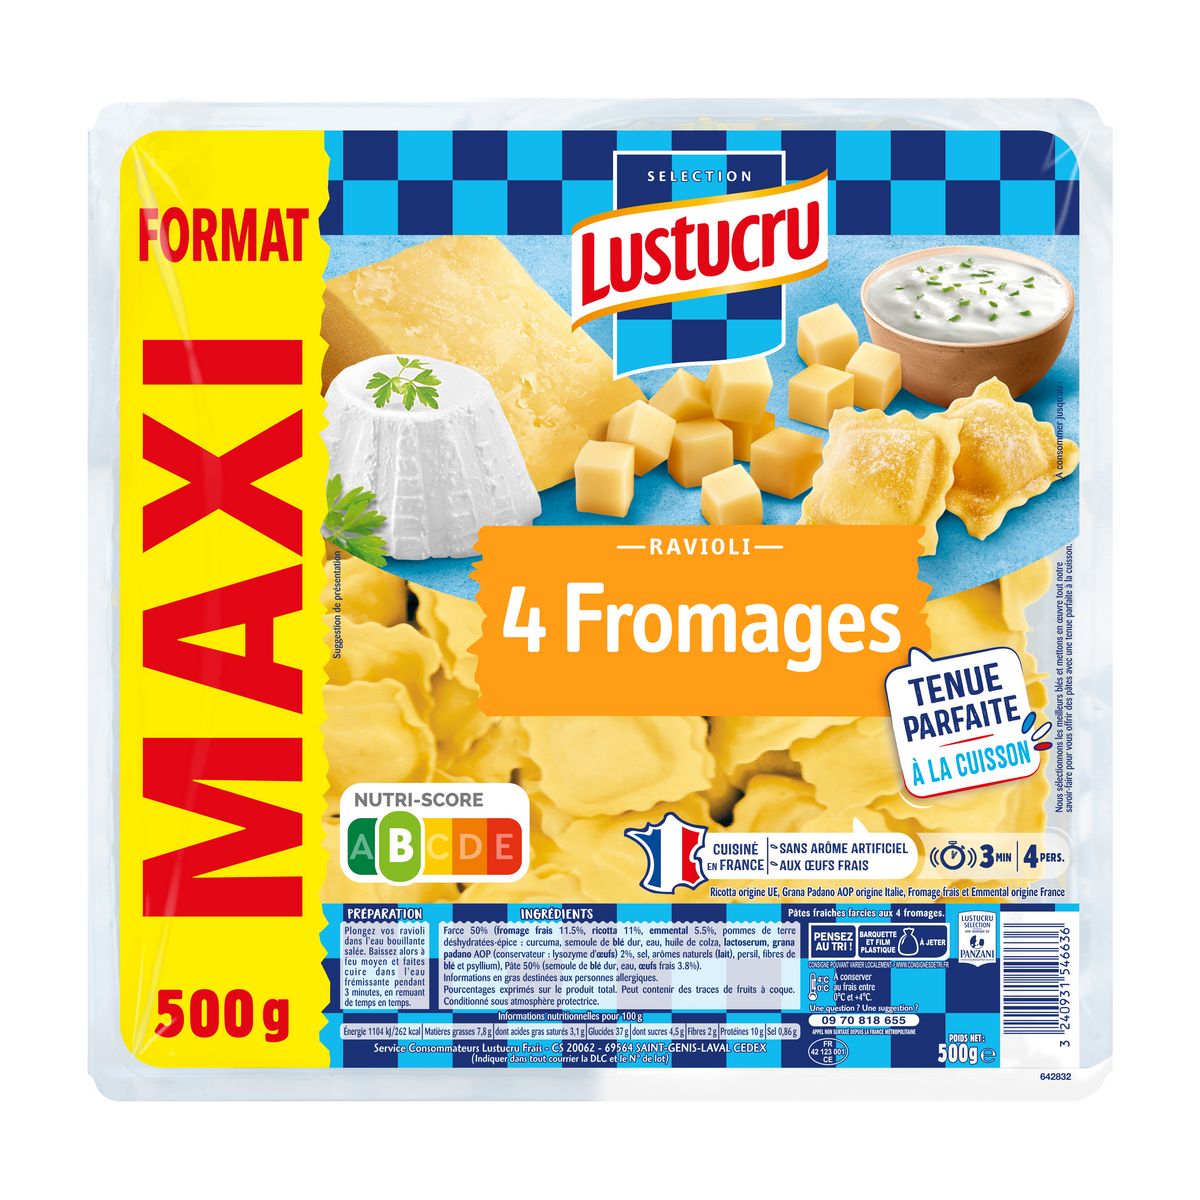 LUSTUCRU Ravioli 4 fromages Format Maxi 4 portions 500g